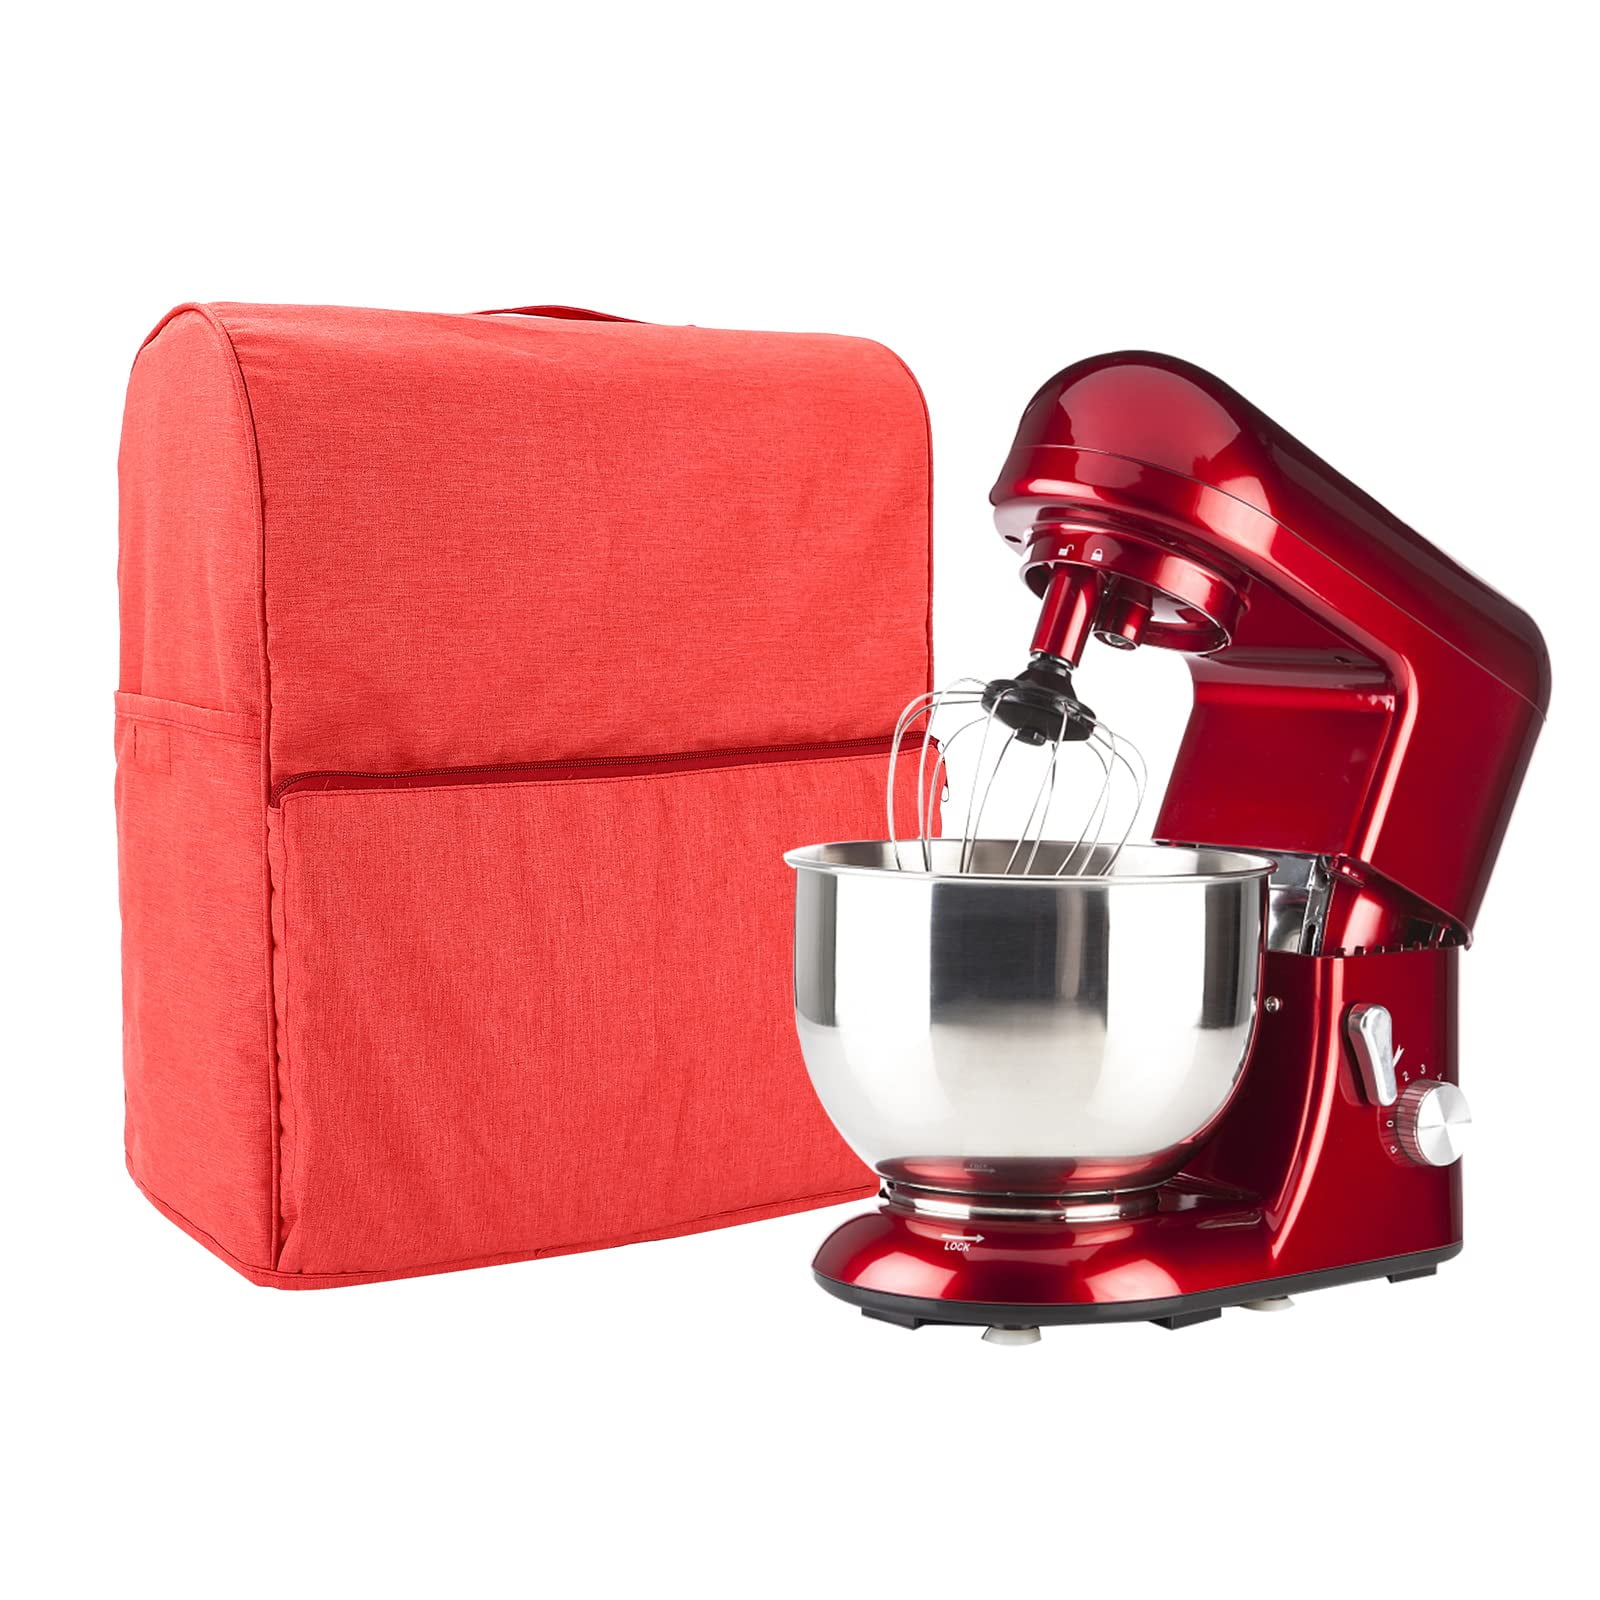 Stand Mixer Dust Cover Kitchen Aid